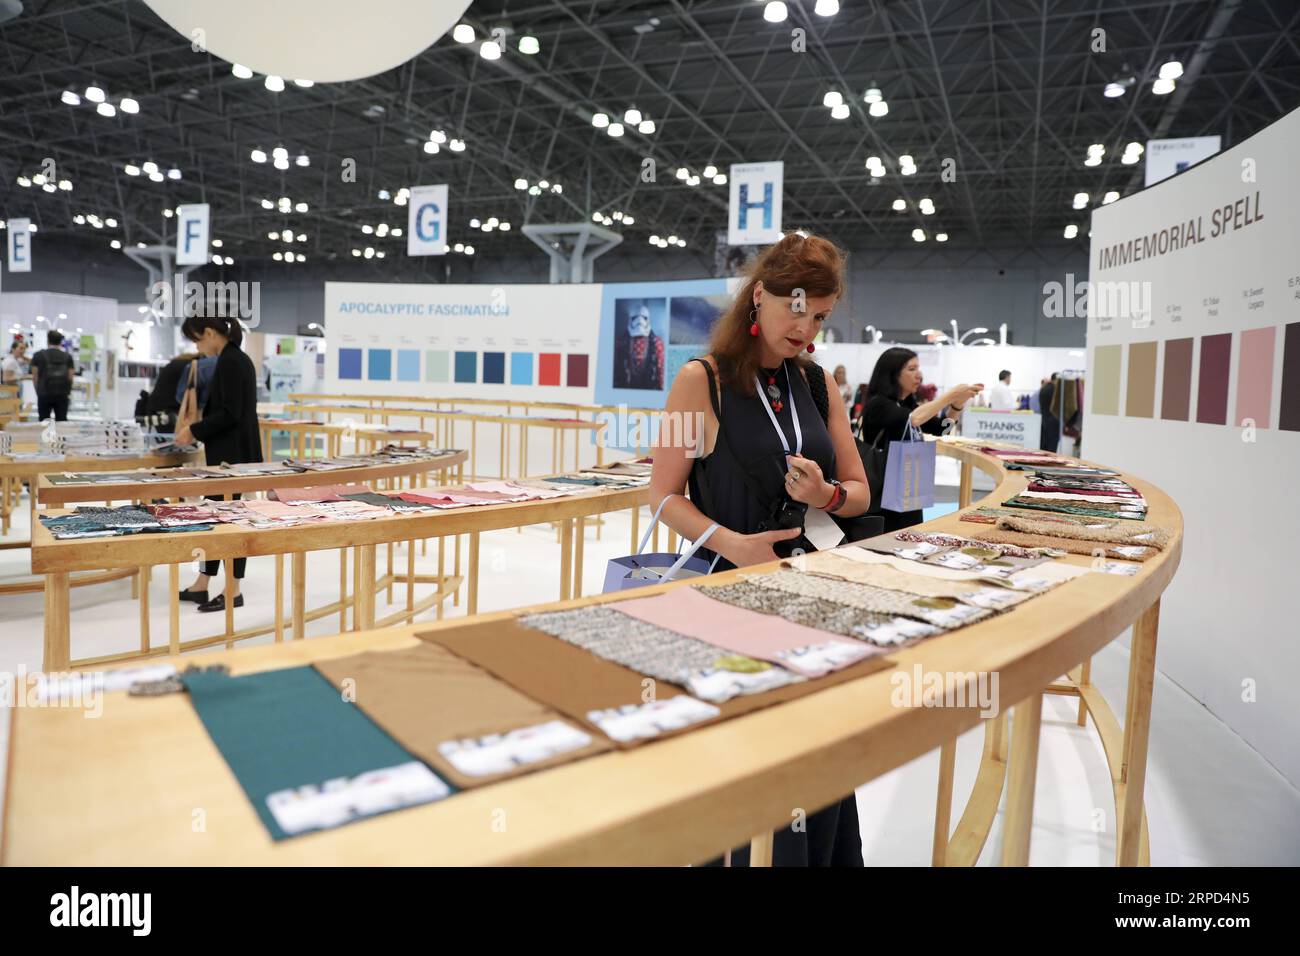 (190722) -- NEW YORK, July 22, 2019 -- Visitors look at exhibits during the 20th China Textile and Apparel Trade Show in New York, the United States, July 22, 2019. The 20th China Textile and Apparel Trade Show in New York opened on Monday in Manhattan s Javits Center, serving as a platform to showcase the latest industrial trends and help Chinese companies explore the U.S. market. Over 500 Chinese garment, fabric and textile companies are attending this year s trade show, which will run through Wednesday. Another 300 or so companies from 16 countries and regions also joined the show with an e Stock Photo